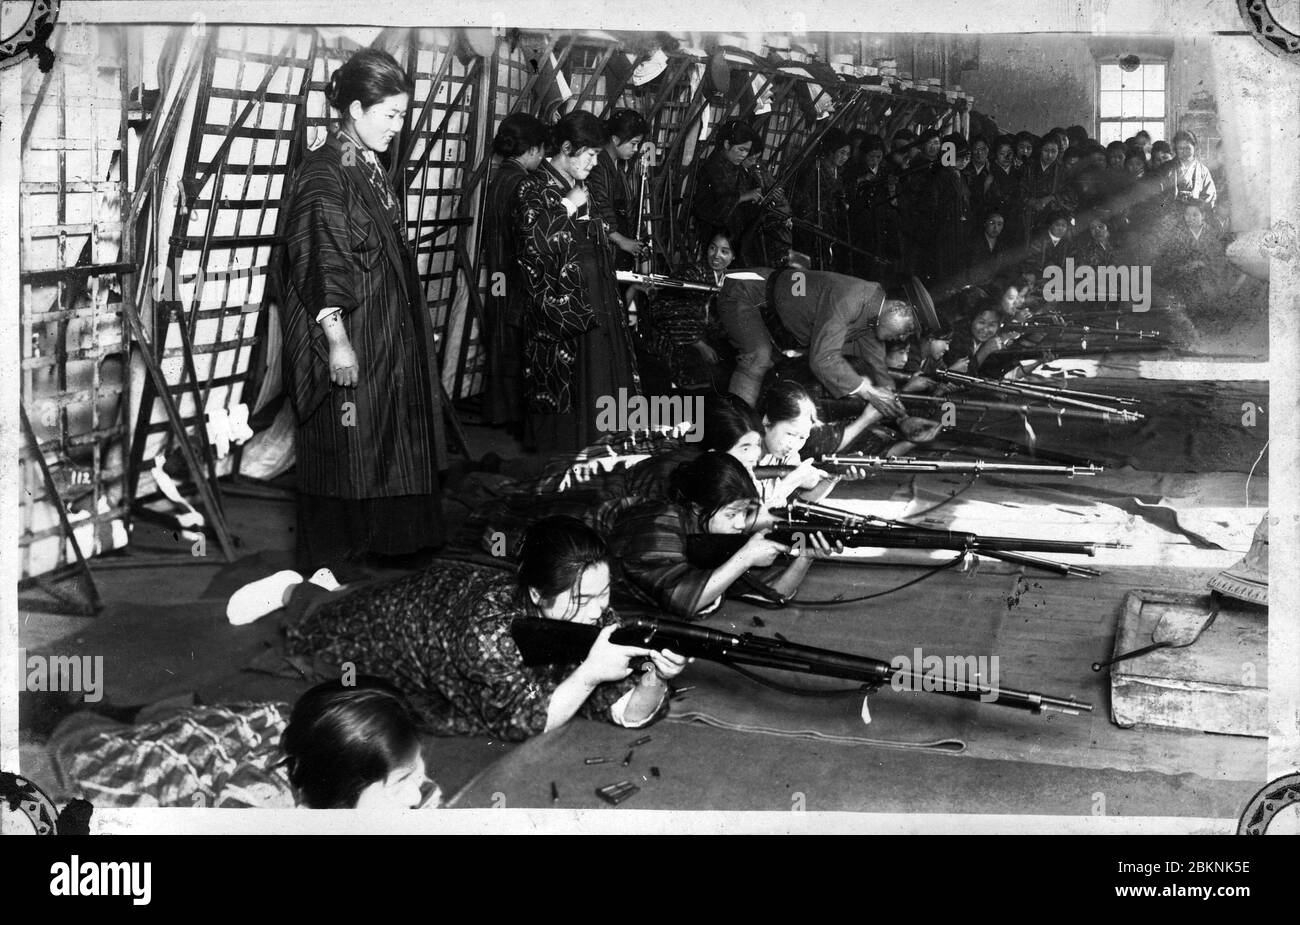 [ 1920s Japan - Rifle Practice for Japanese Women ] —   Women in kimono participate in rifle practice.  From a private photo album of a member of the Japanese Imperial Guard (近衛師団, Konoe Shidan) who served between 1928 (Showa 3) and 1930 (Showa 5).  20th century gelatin silver print. Stock Photo